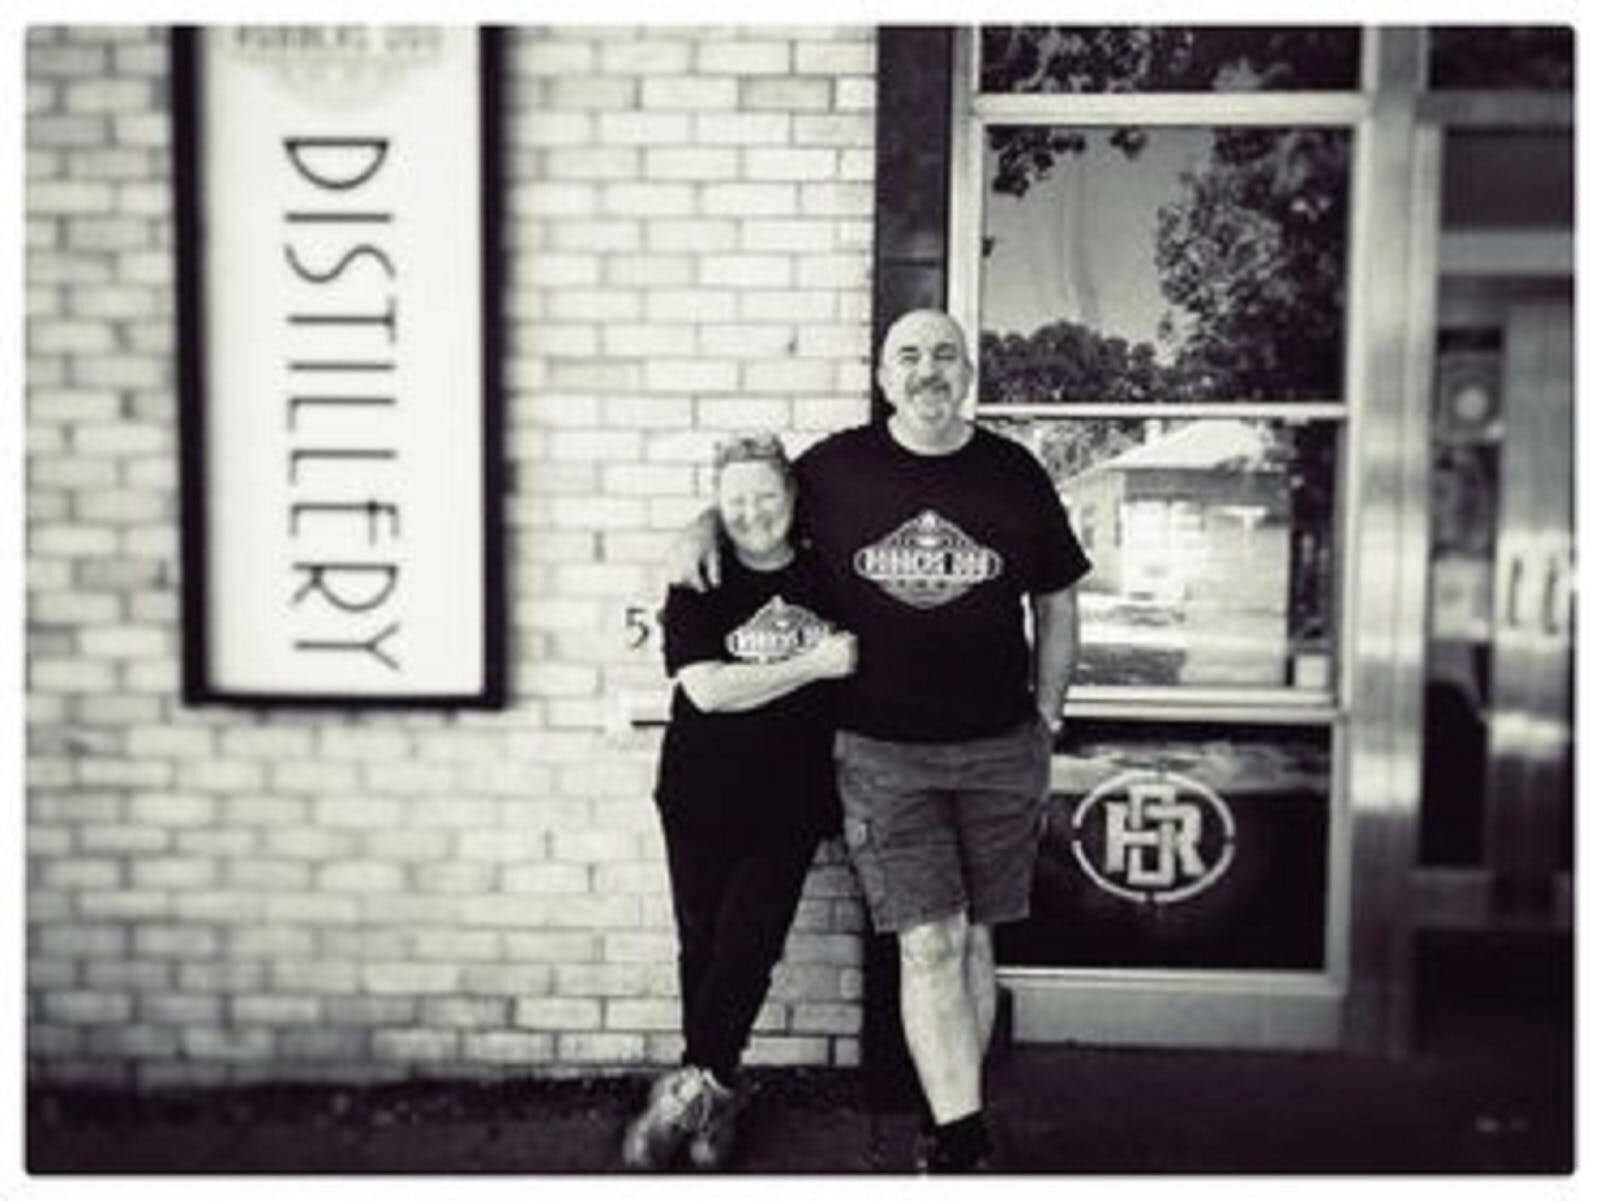 Robbers Dog Distillery owners Rob & Cath